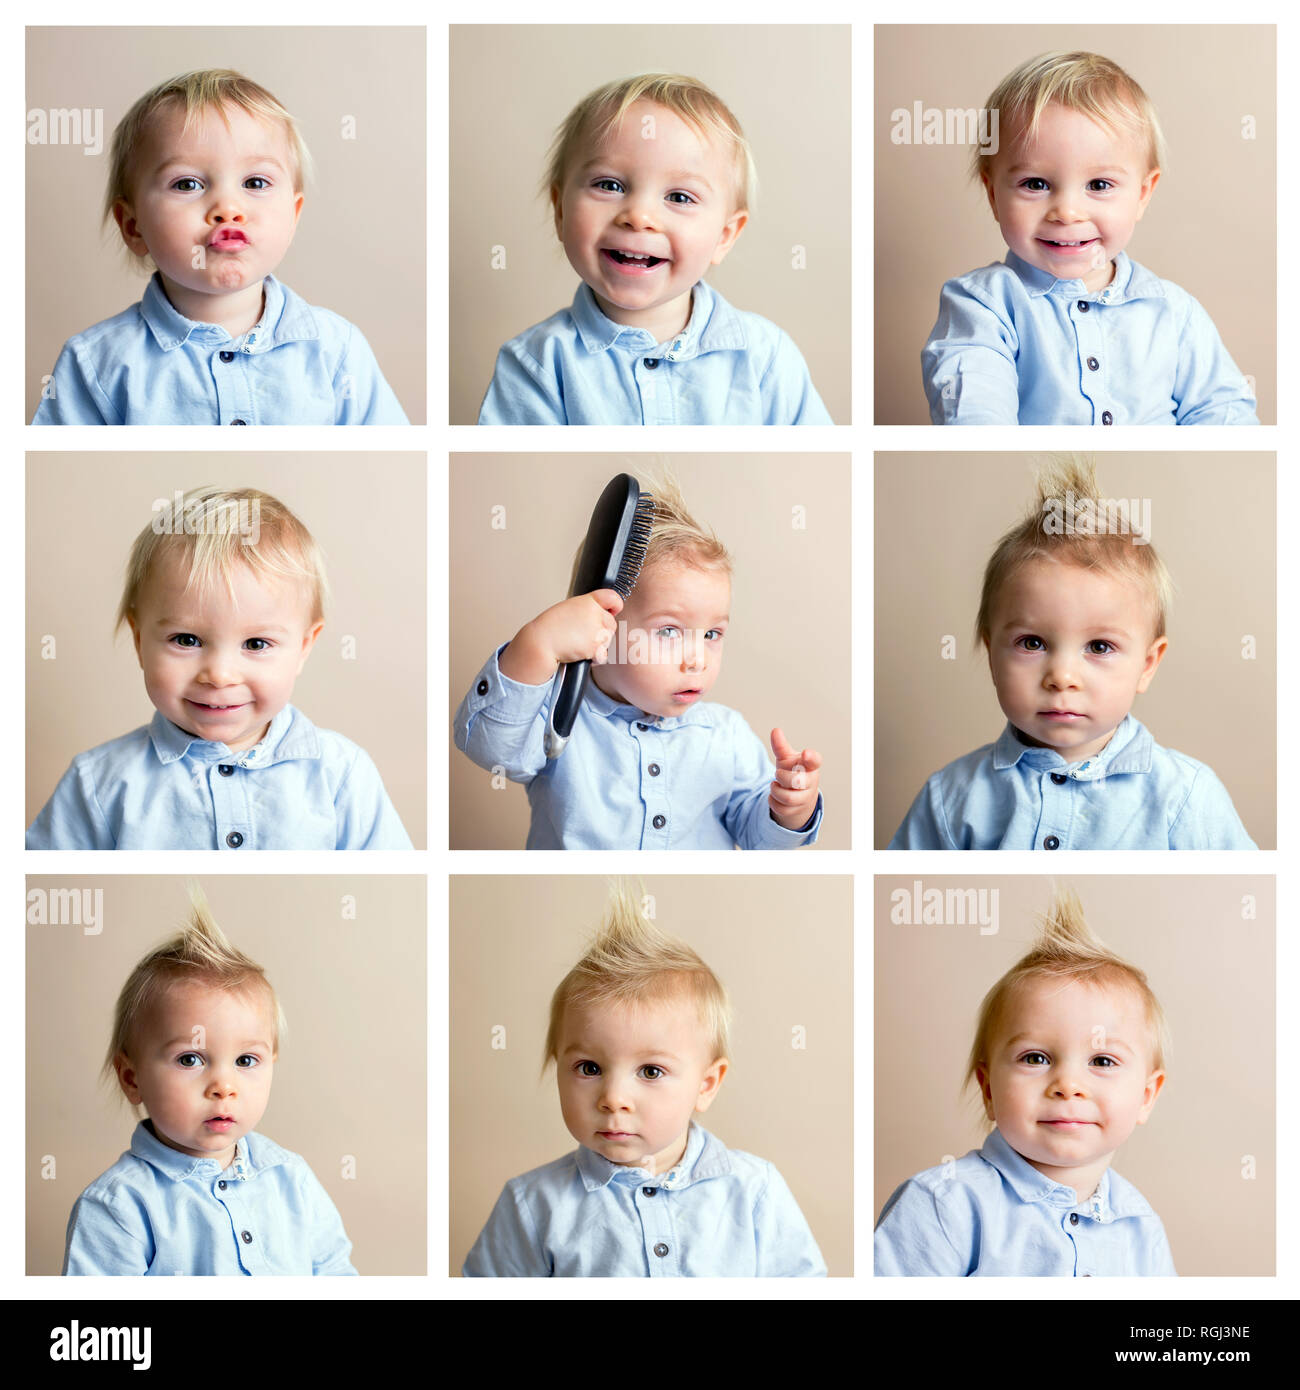 Collage Of Pictures Of Cute Baby Toddler Boy Isolated On Beige Background Child Dressed Casual Making Different Face Expressions Stock Photo Alamy